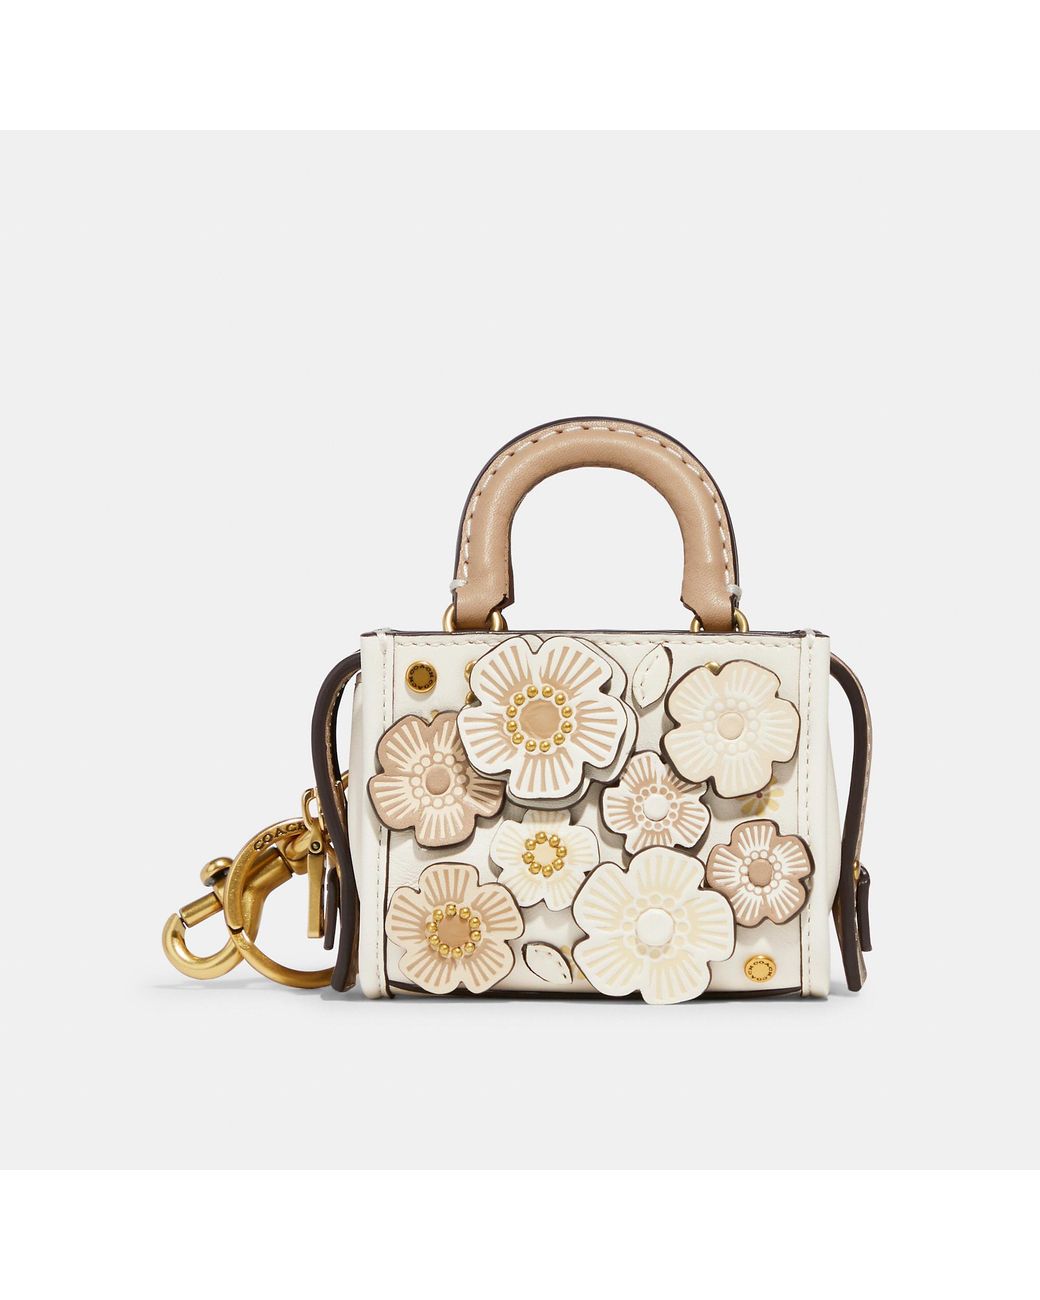 Coach Outlet Mini Rogue Bag Charm With Tea Rose in Natural